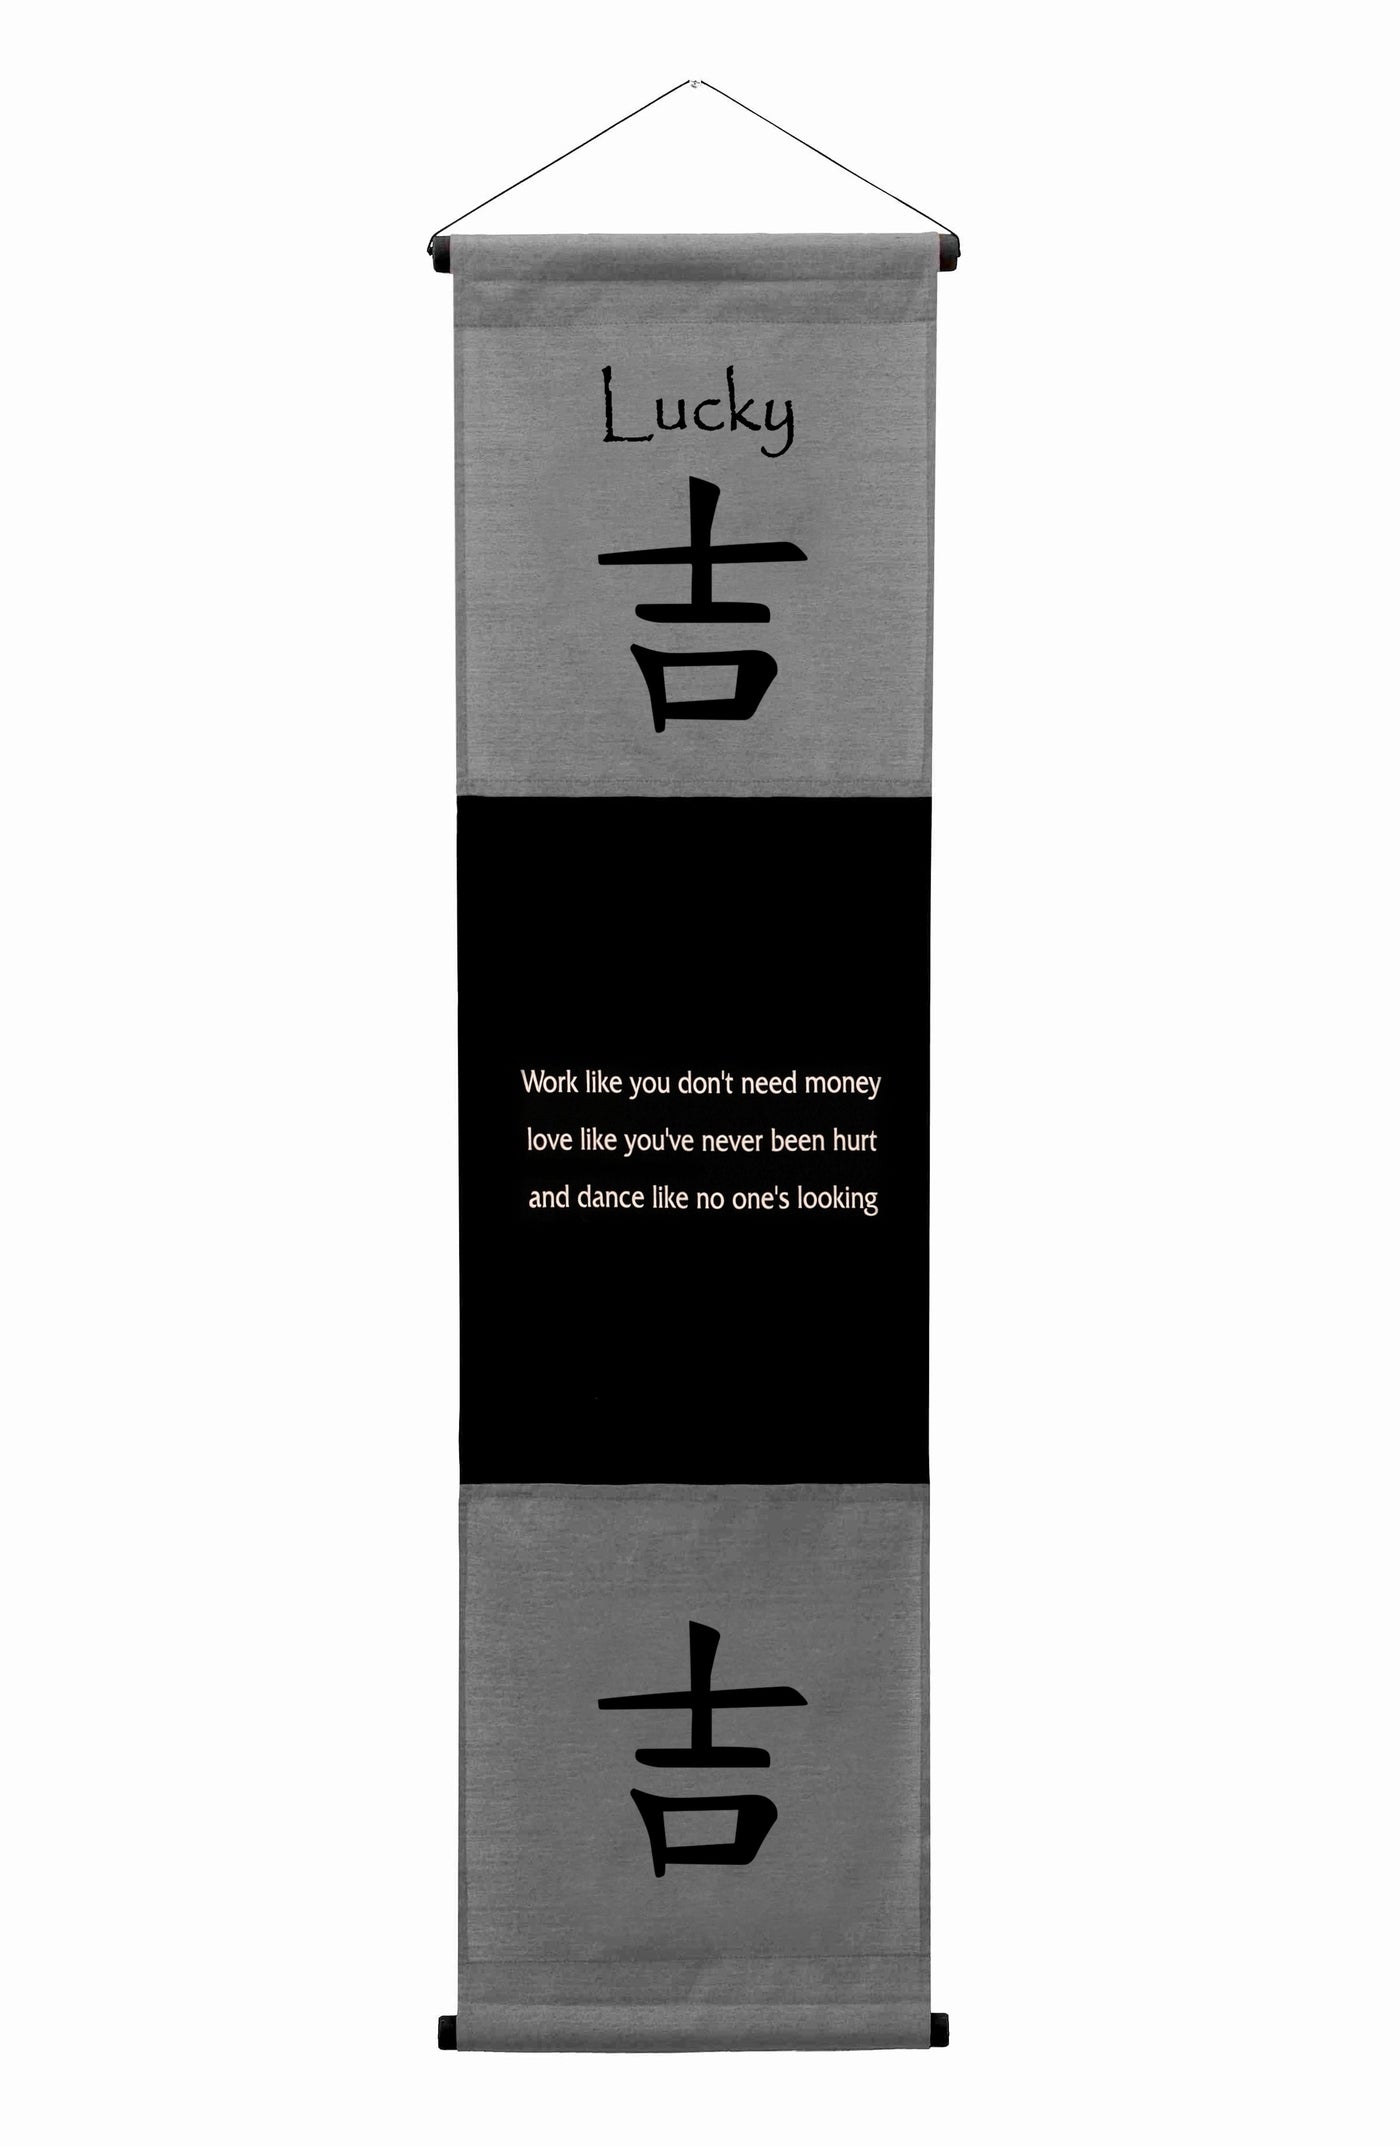 Inspirational Wall Decor Lucky Banner Art, Inspiring Quote Wall Hanging Scroll, Affirmation Motivational Uplifting Message, Thought Saying Tapestry